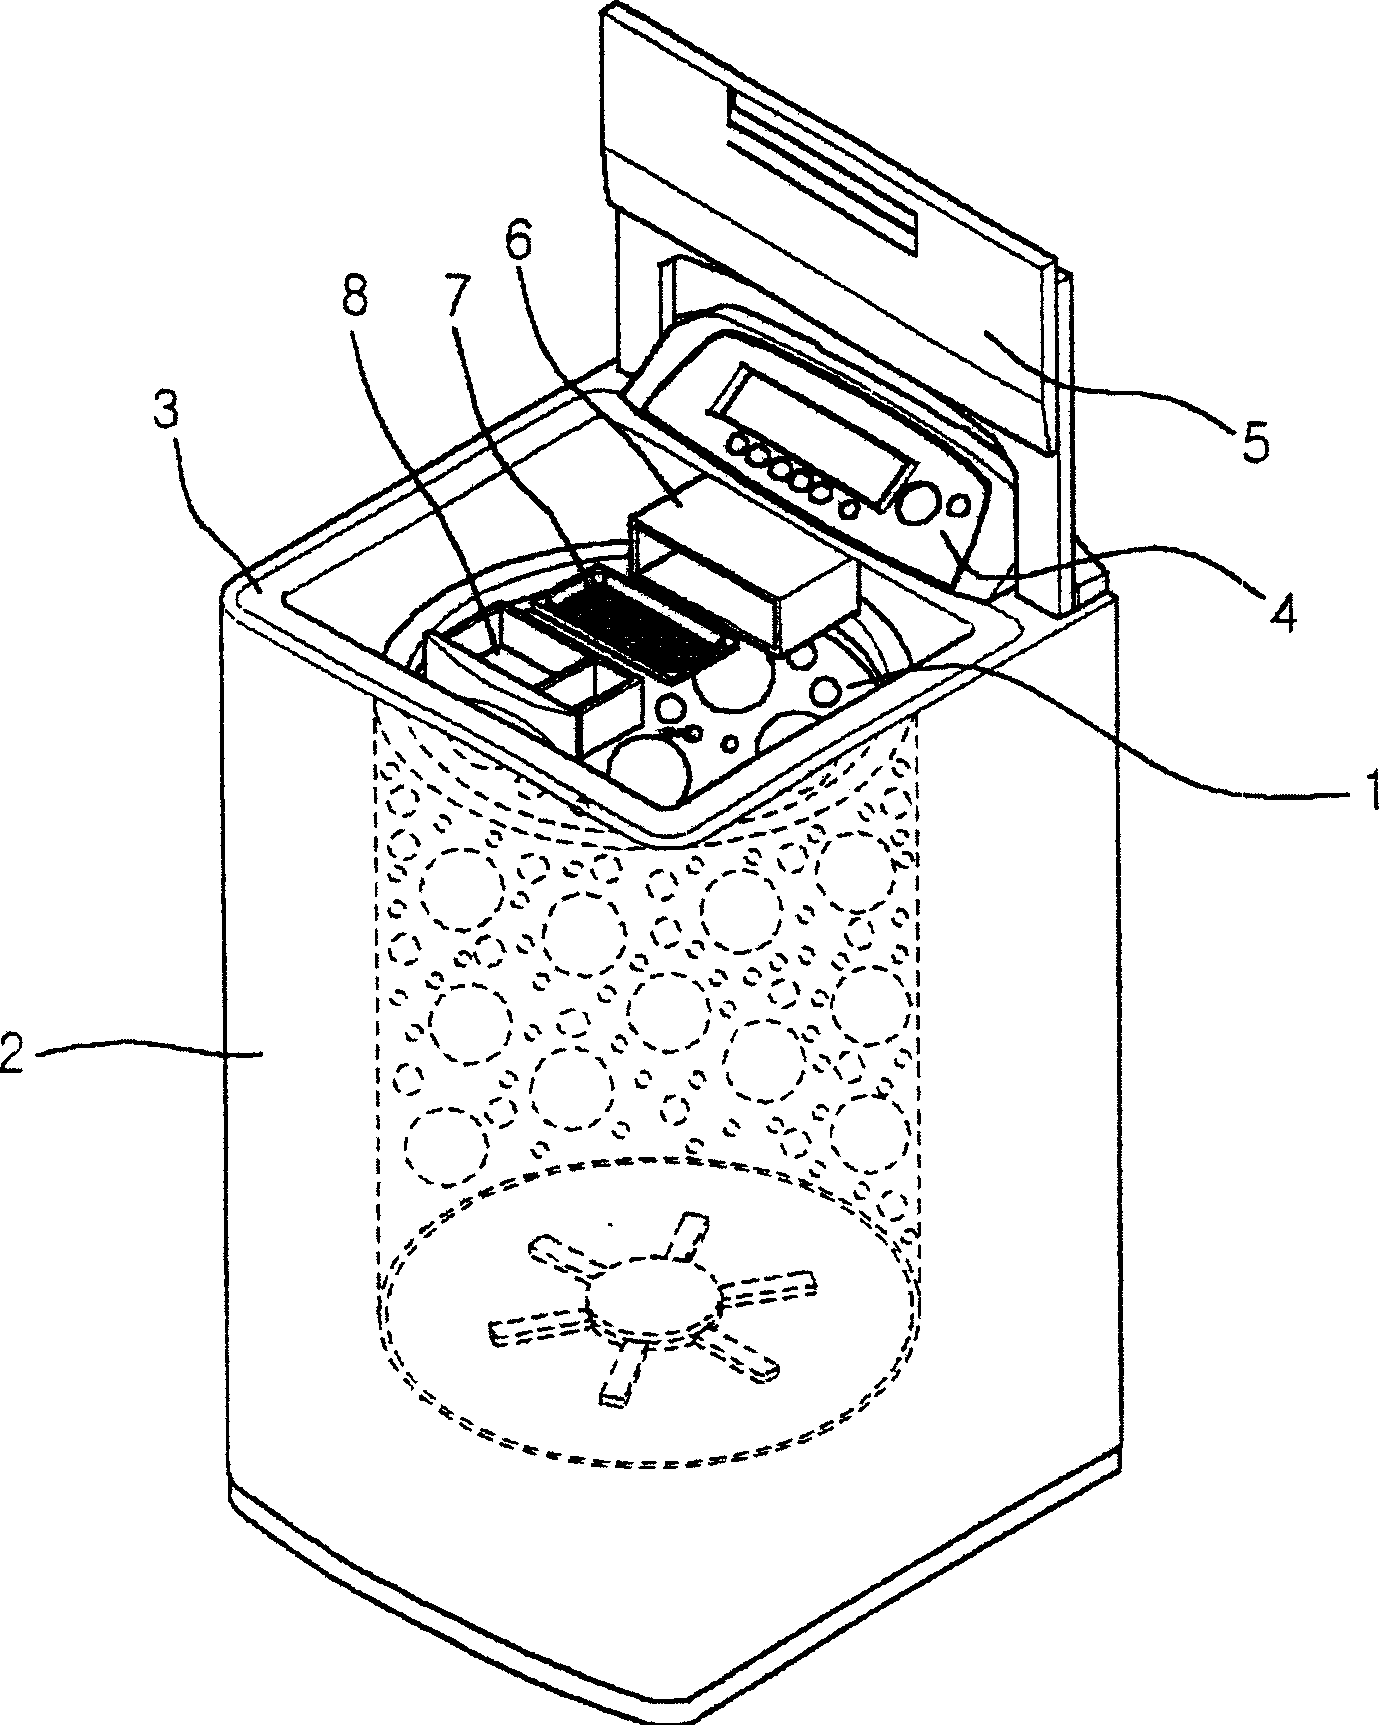 Detergent injection device for washing machine